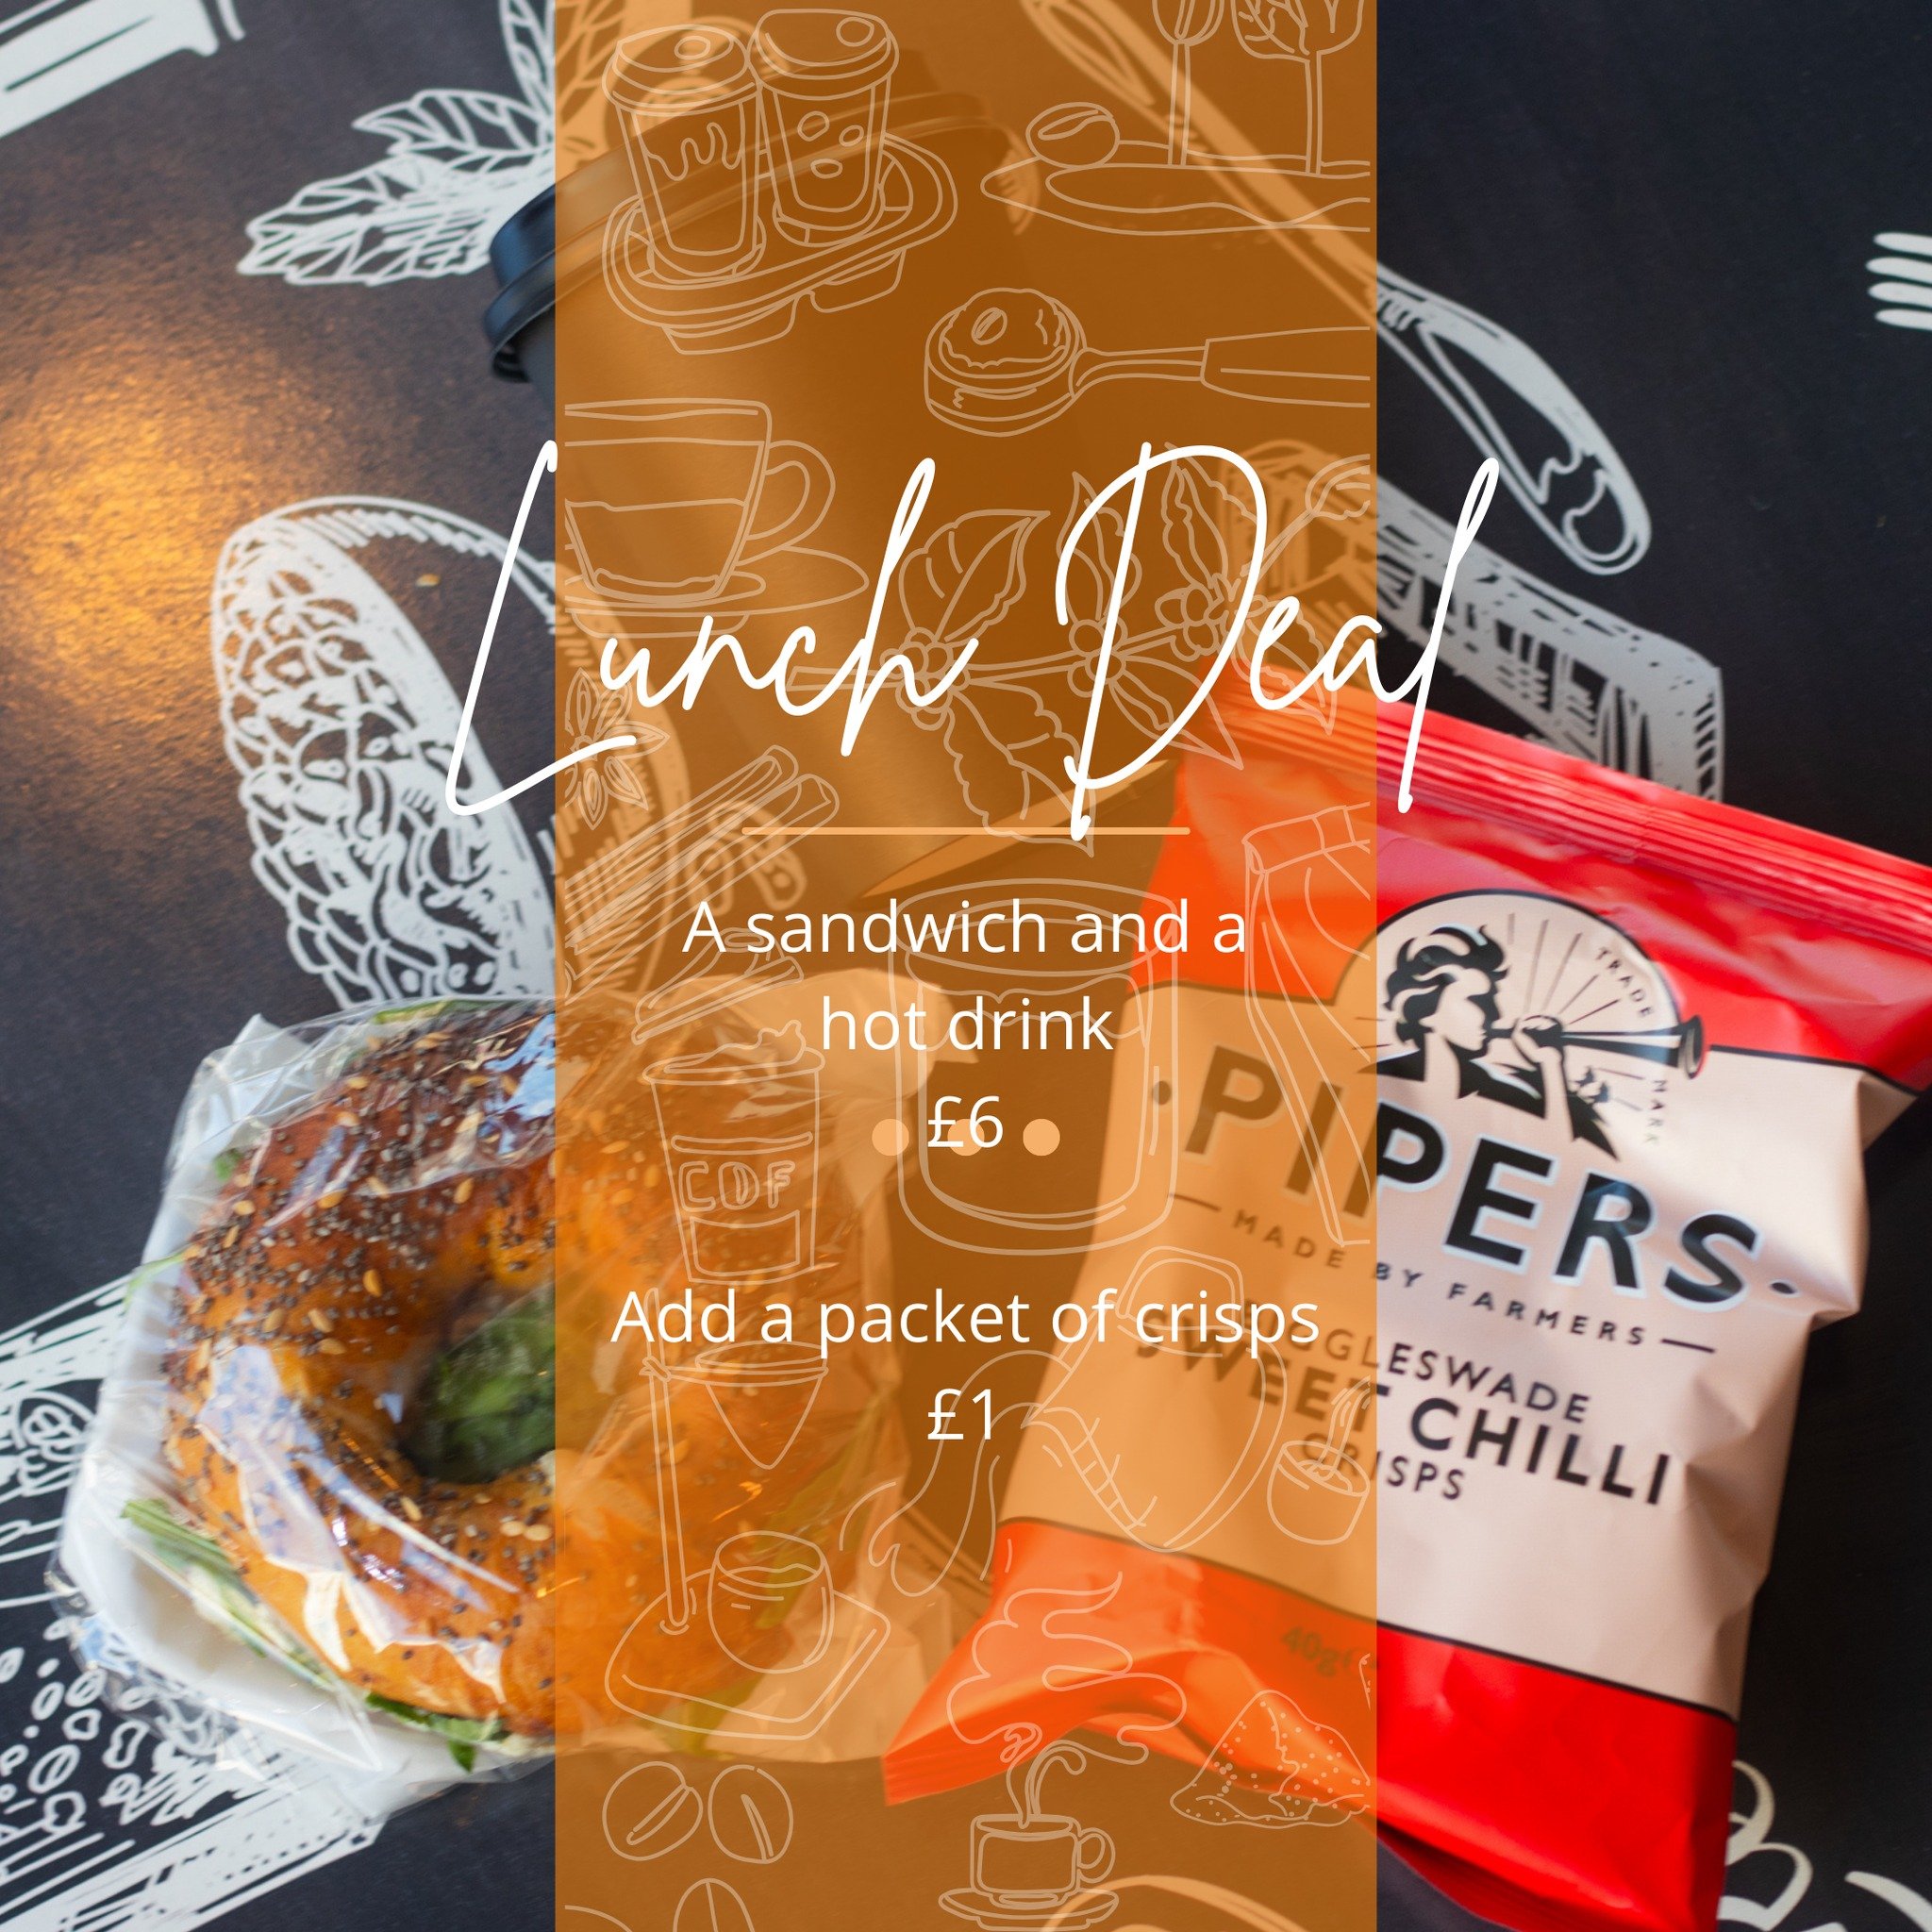 Hey there! If you're looking for a delicious lunch option, we've got you covered! 

Our lunch deal includes a yummy panini and hot drink for &pound;6. Add a packet of crisps for just &pound;1 more 🥪☕️🥔 

#lunchdeal #yumyum #treatyourself #bristol #